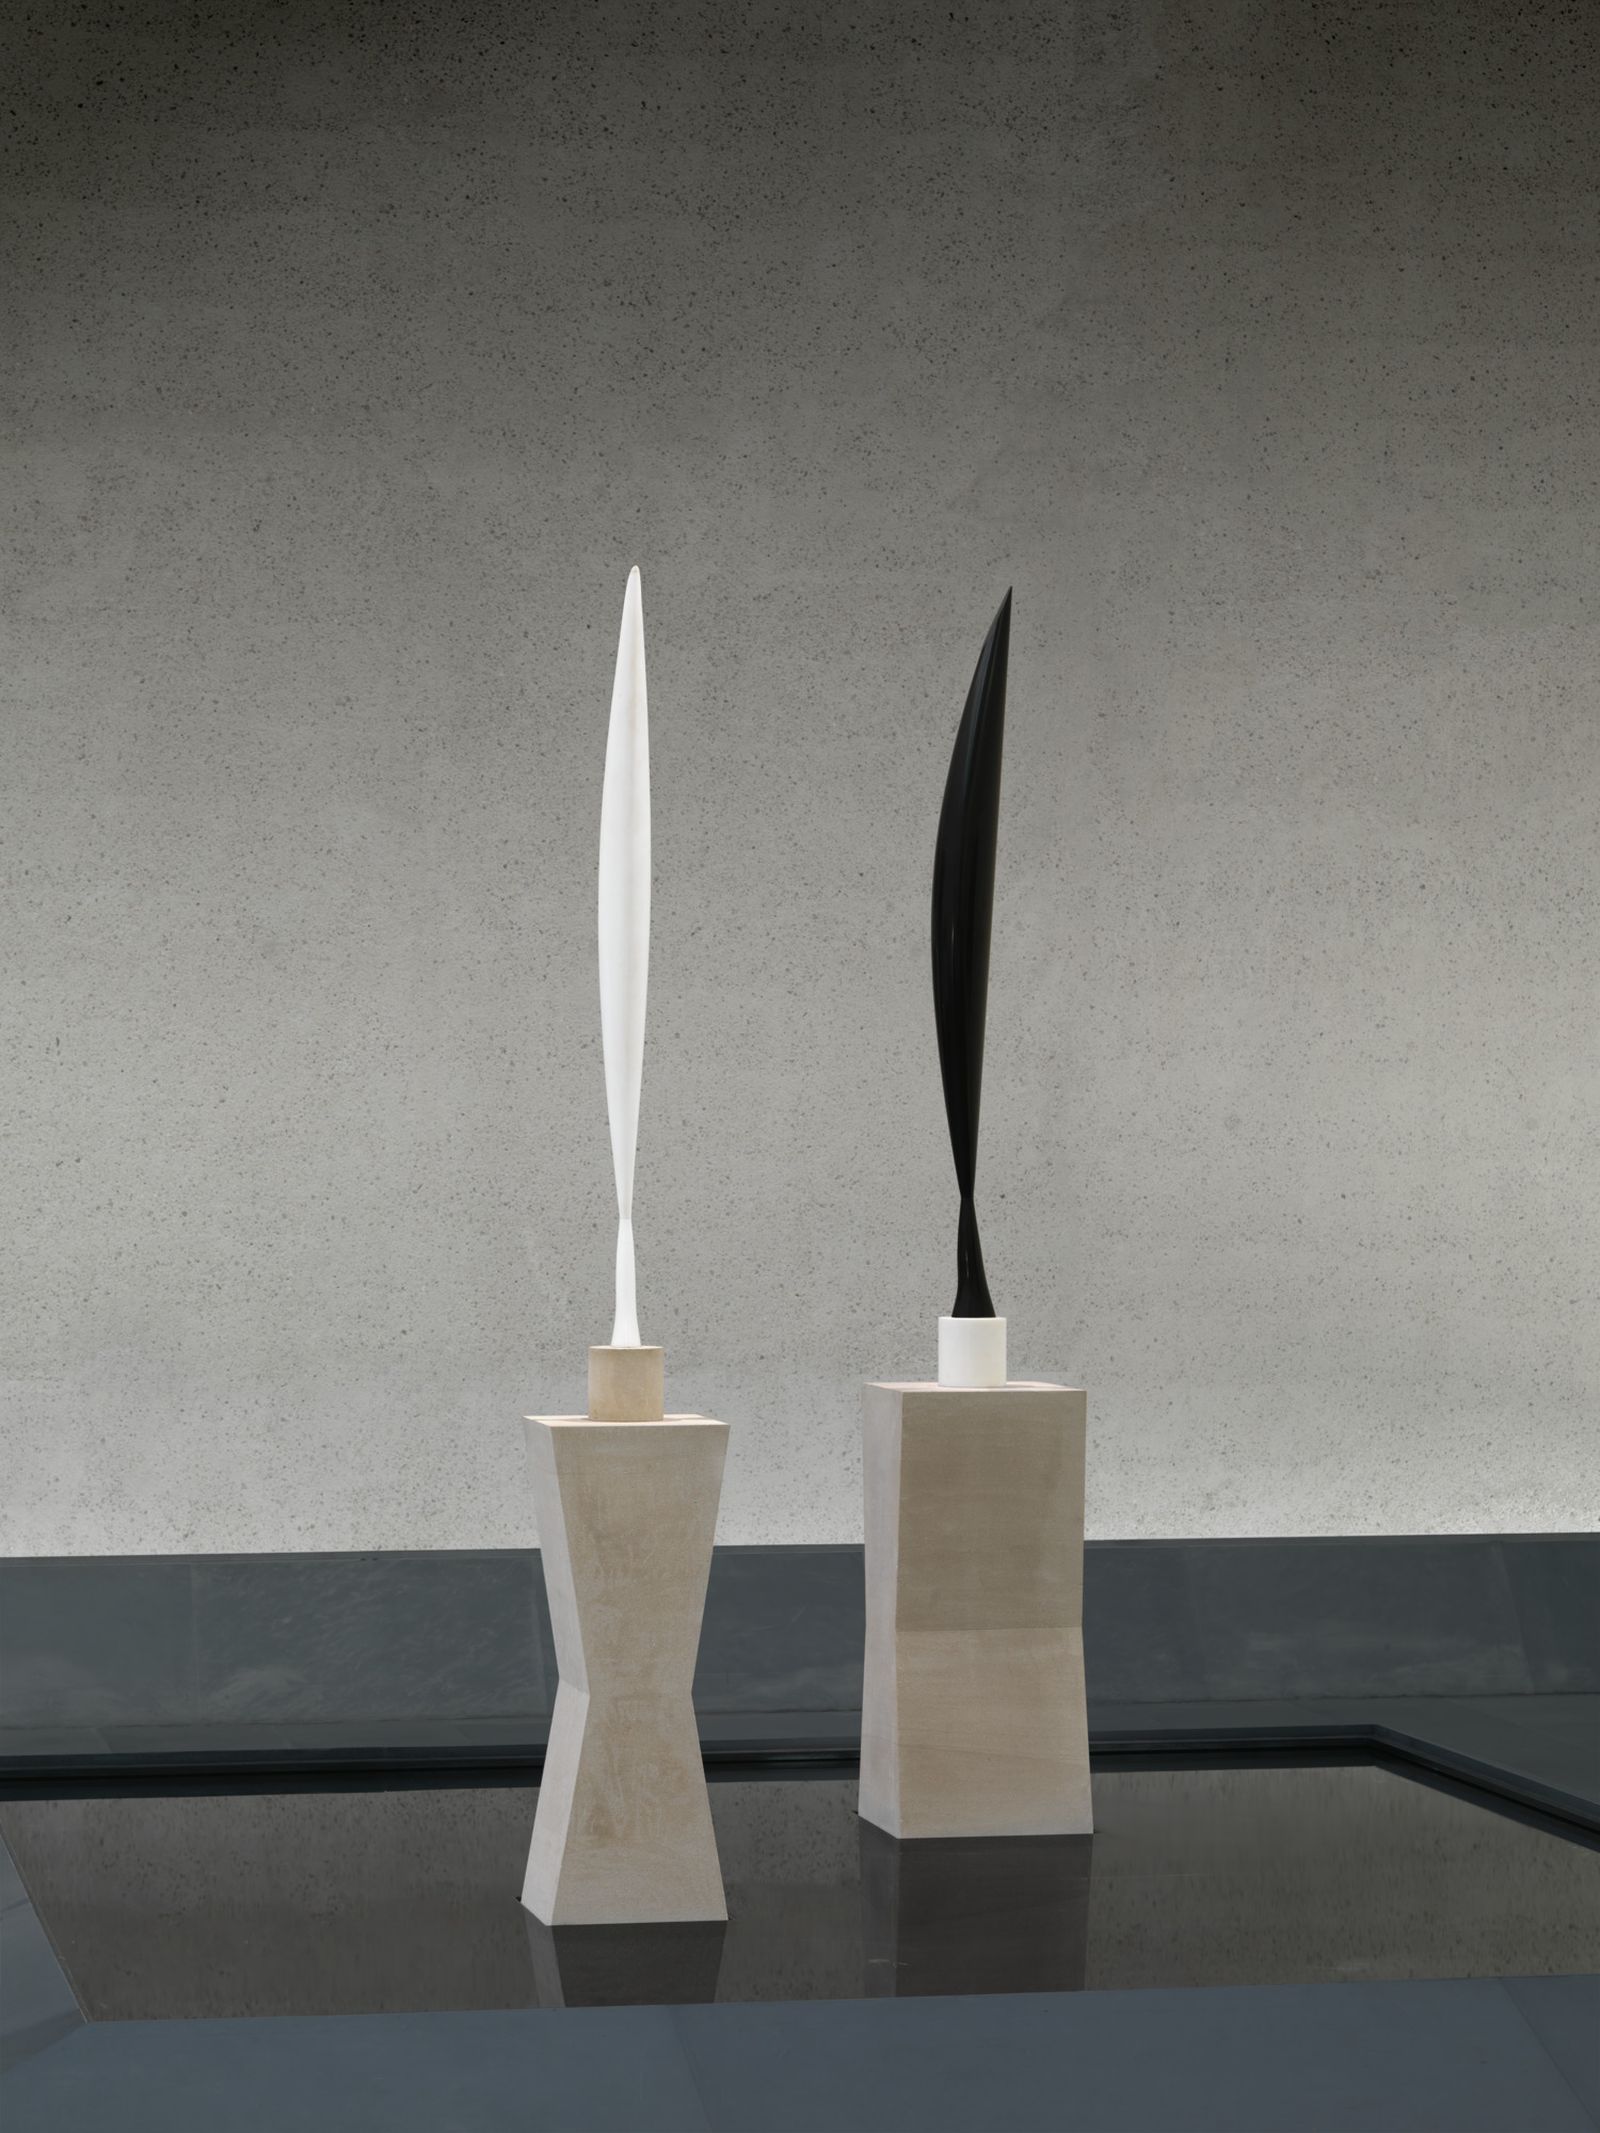 Photo image of two curved and slim abstract sculptures, one in black and one in white